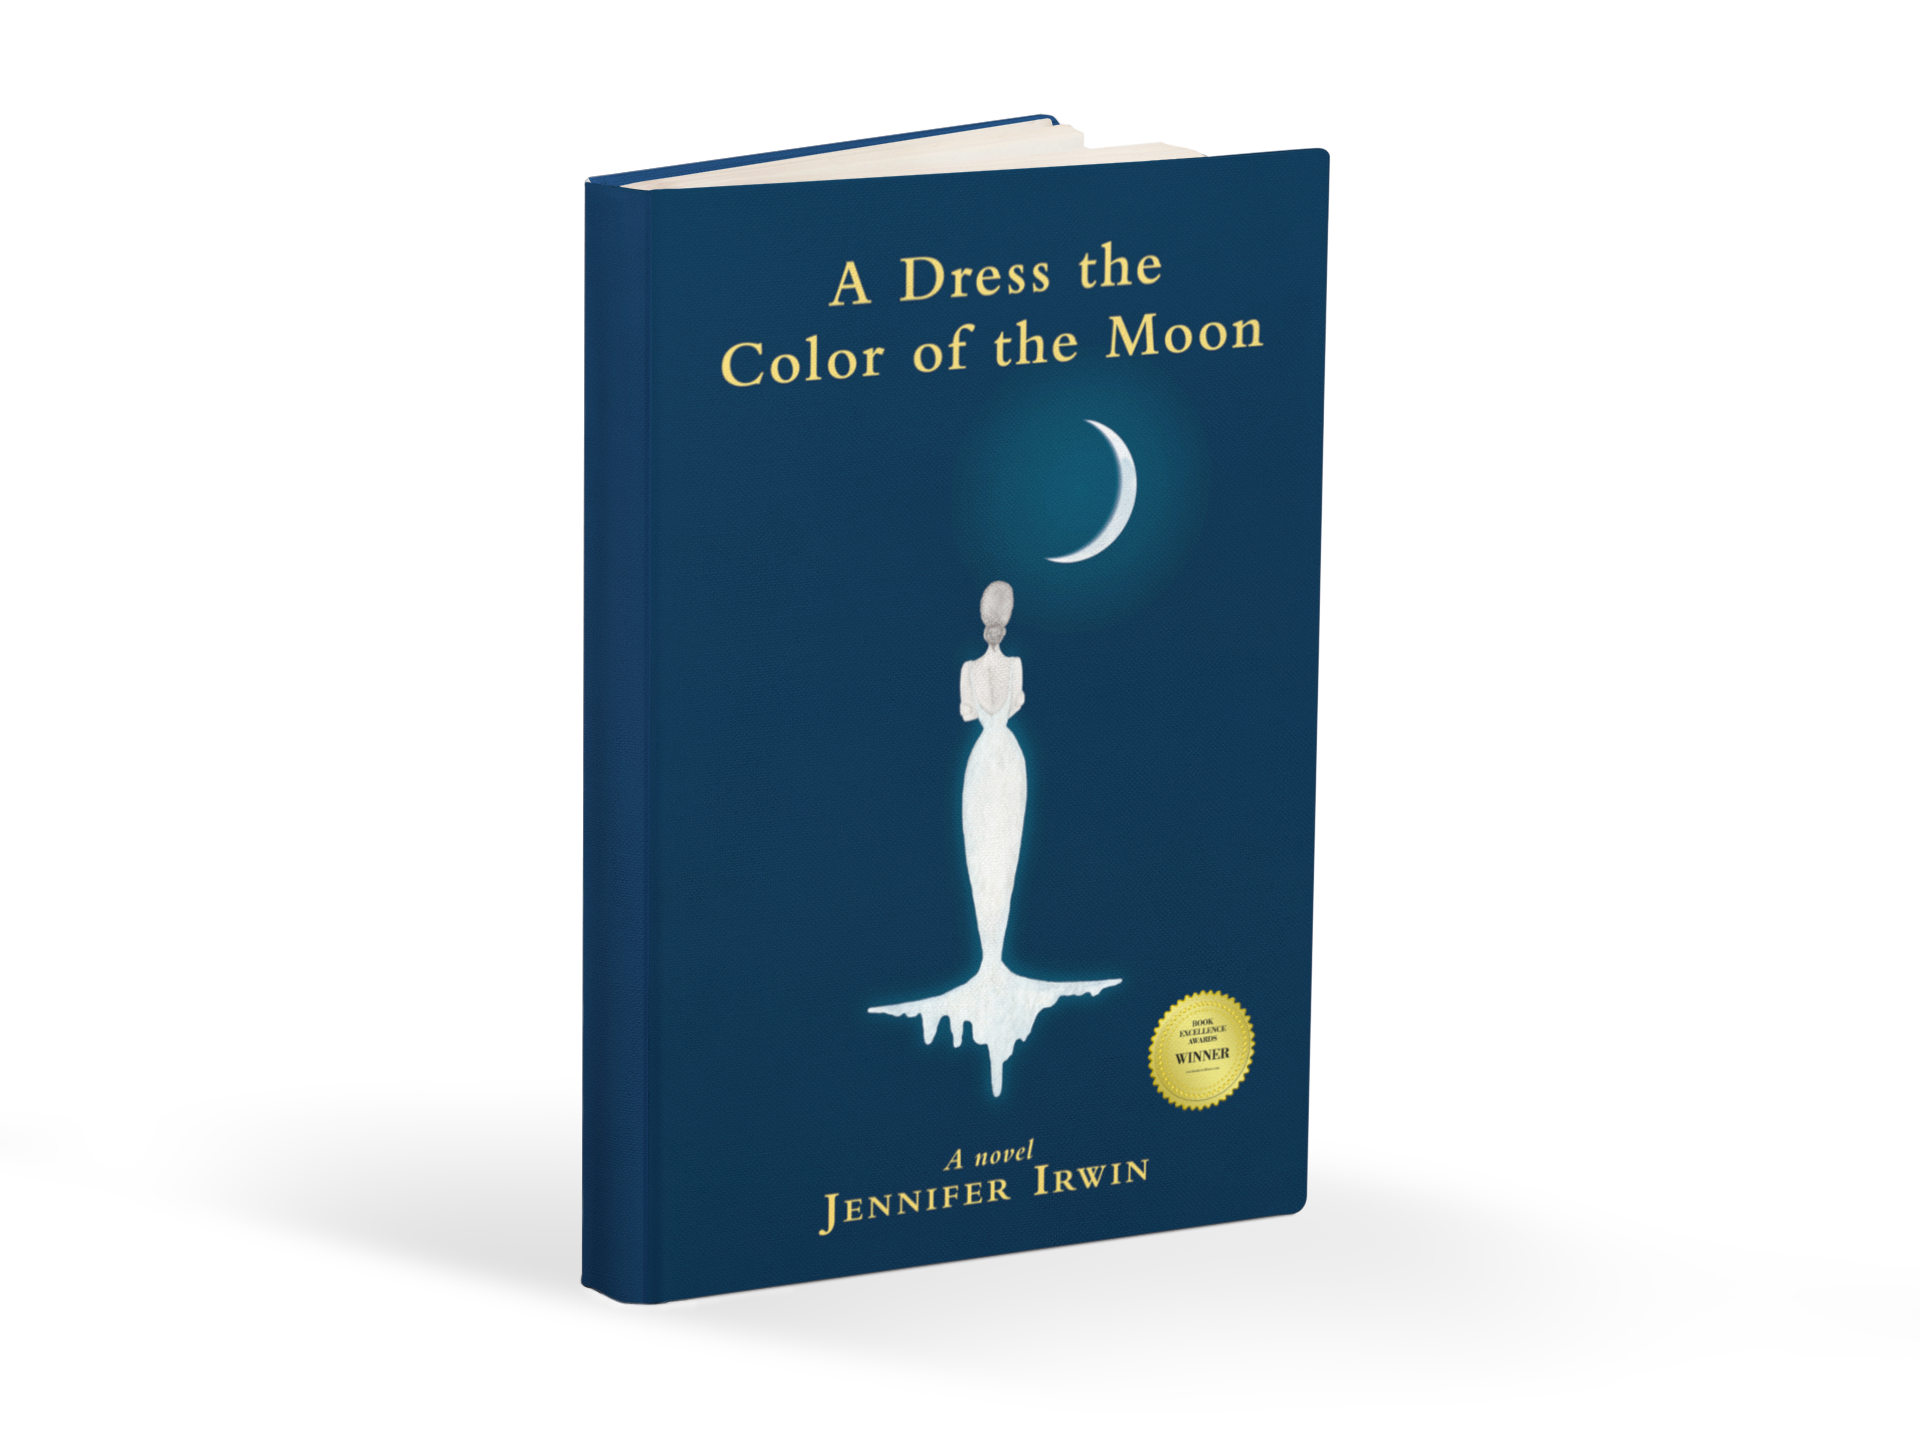 Jennifer Irwin’s, A Dress the Color of the Moon, Wins Top Prize in 2022 Book Excellence Awards 1